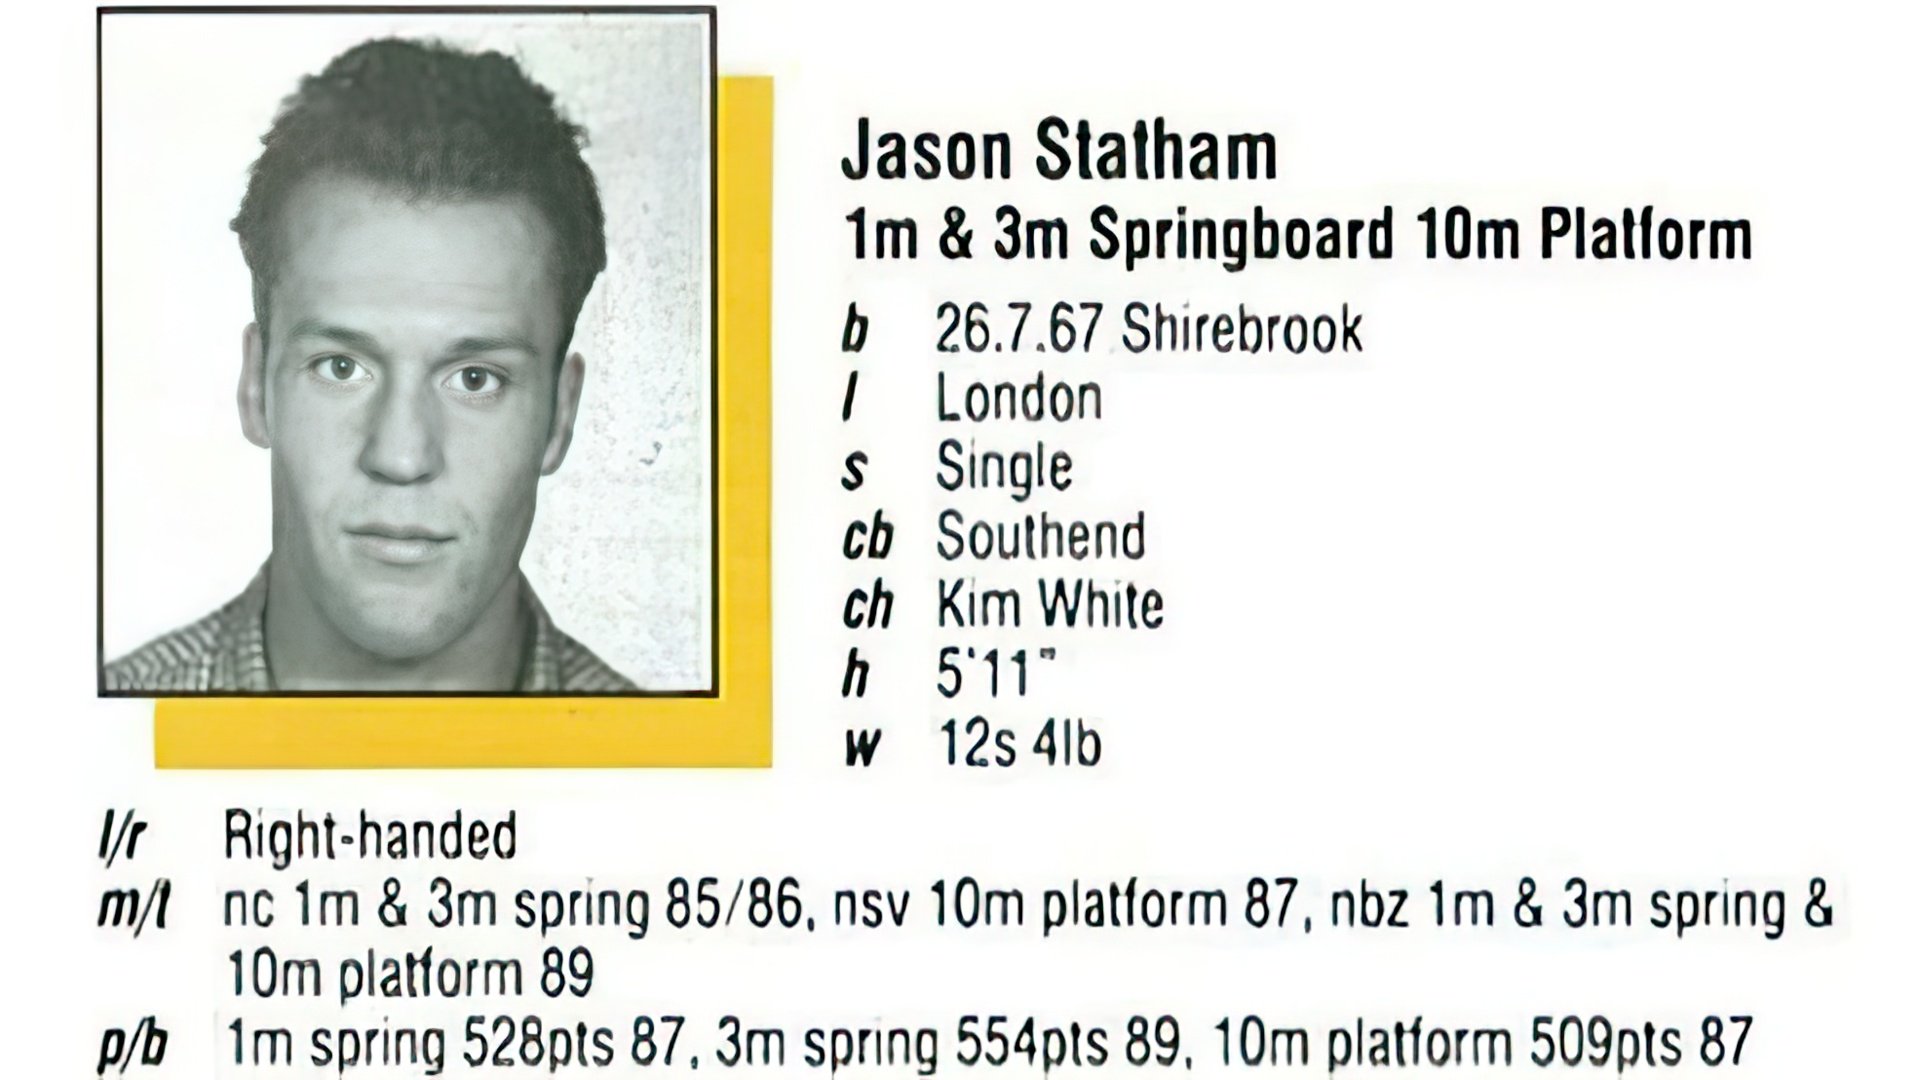 Greetings from Statham’s sporting past